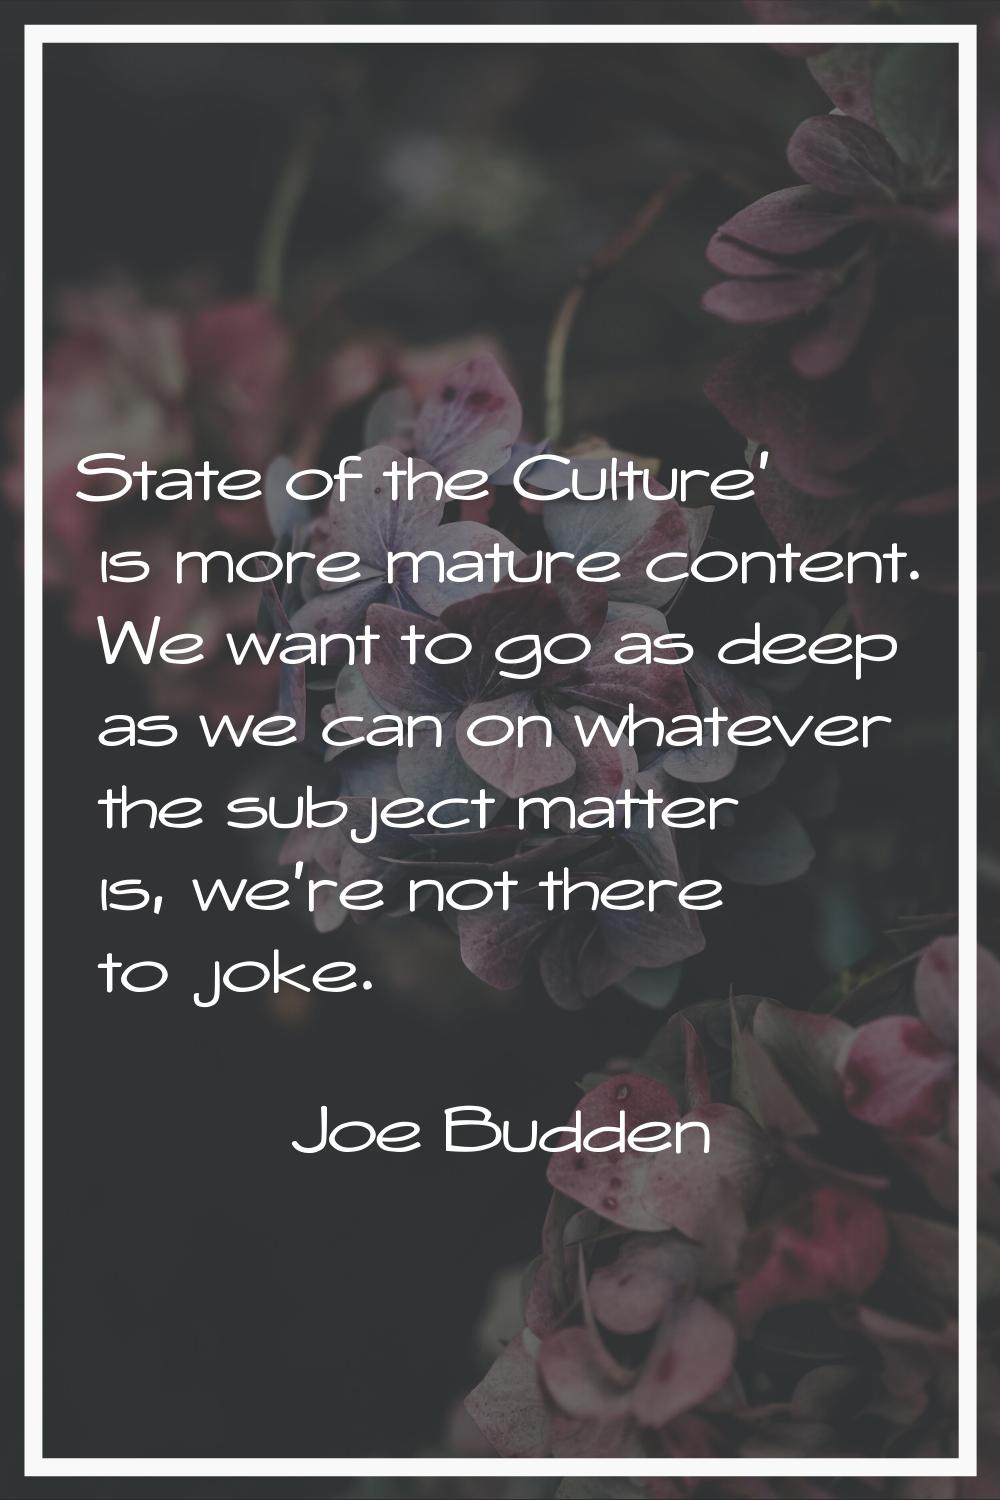 State of the Culture' is more mature content. We want to go as deep as we can on whatever the subje